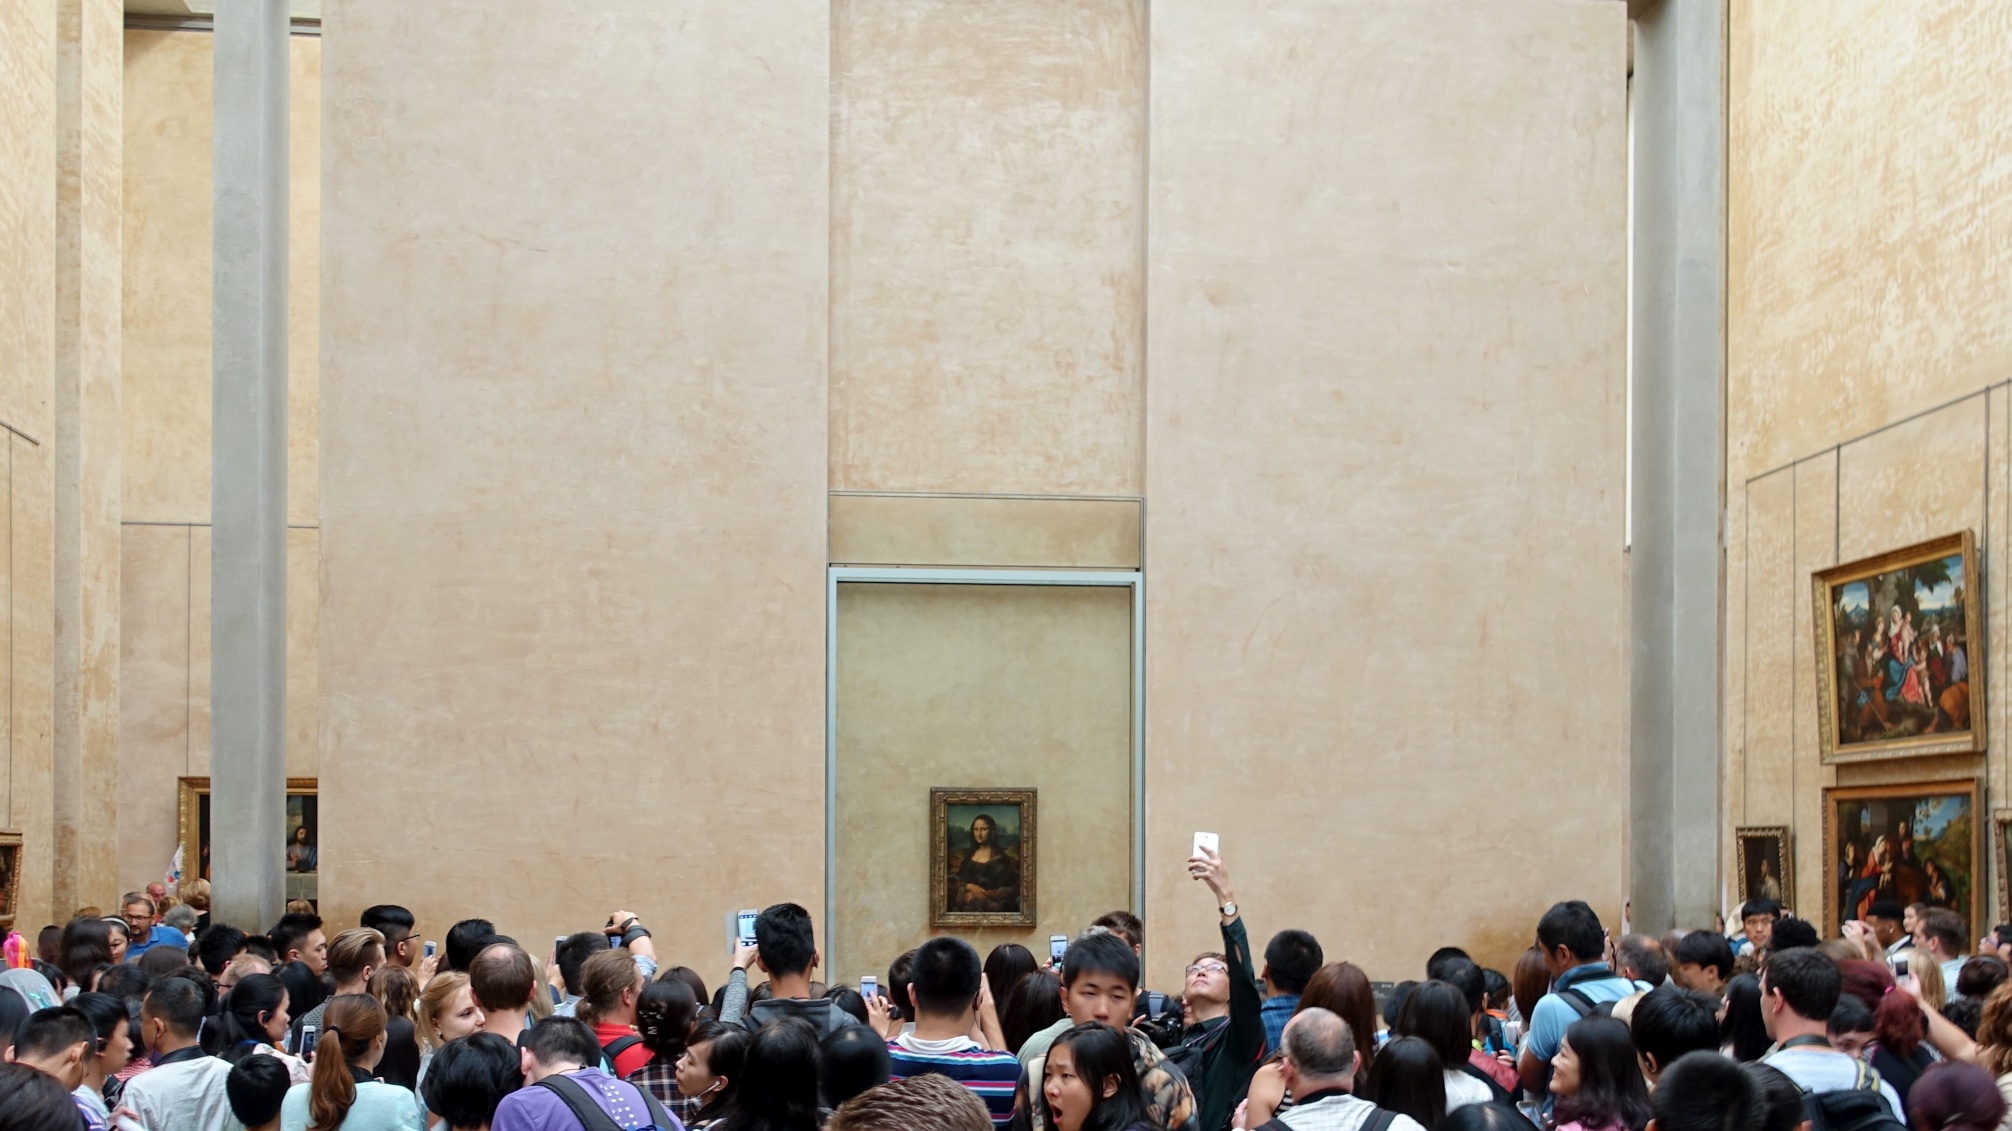 Group of people taking in the view of Mona Lisa in Paris, France